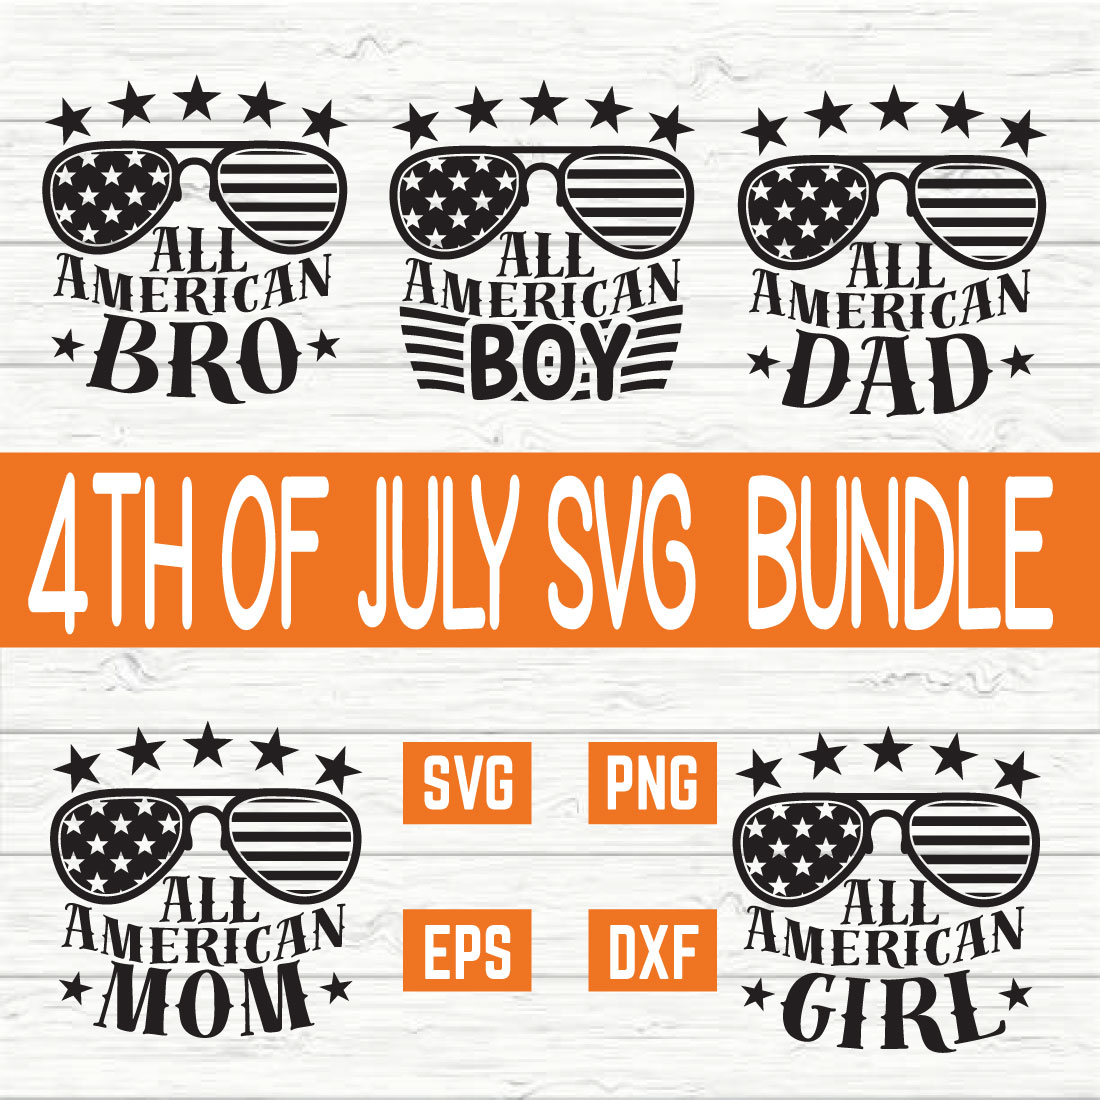 4th Of July T Shirt Bundle vol 6 cover image.